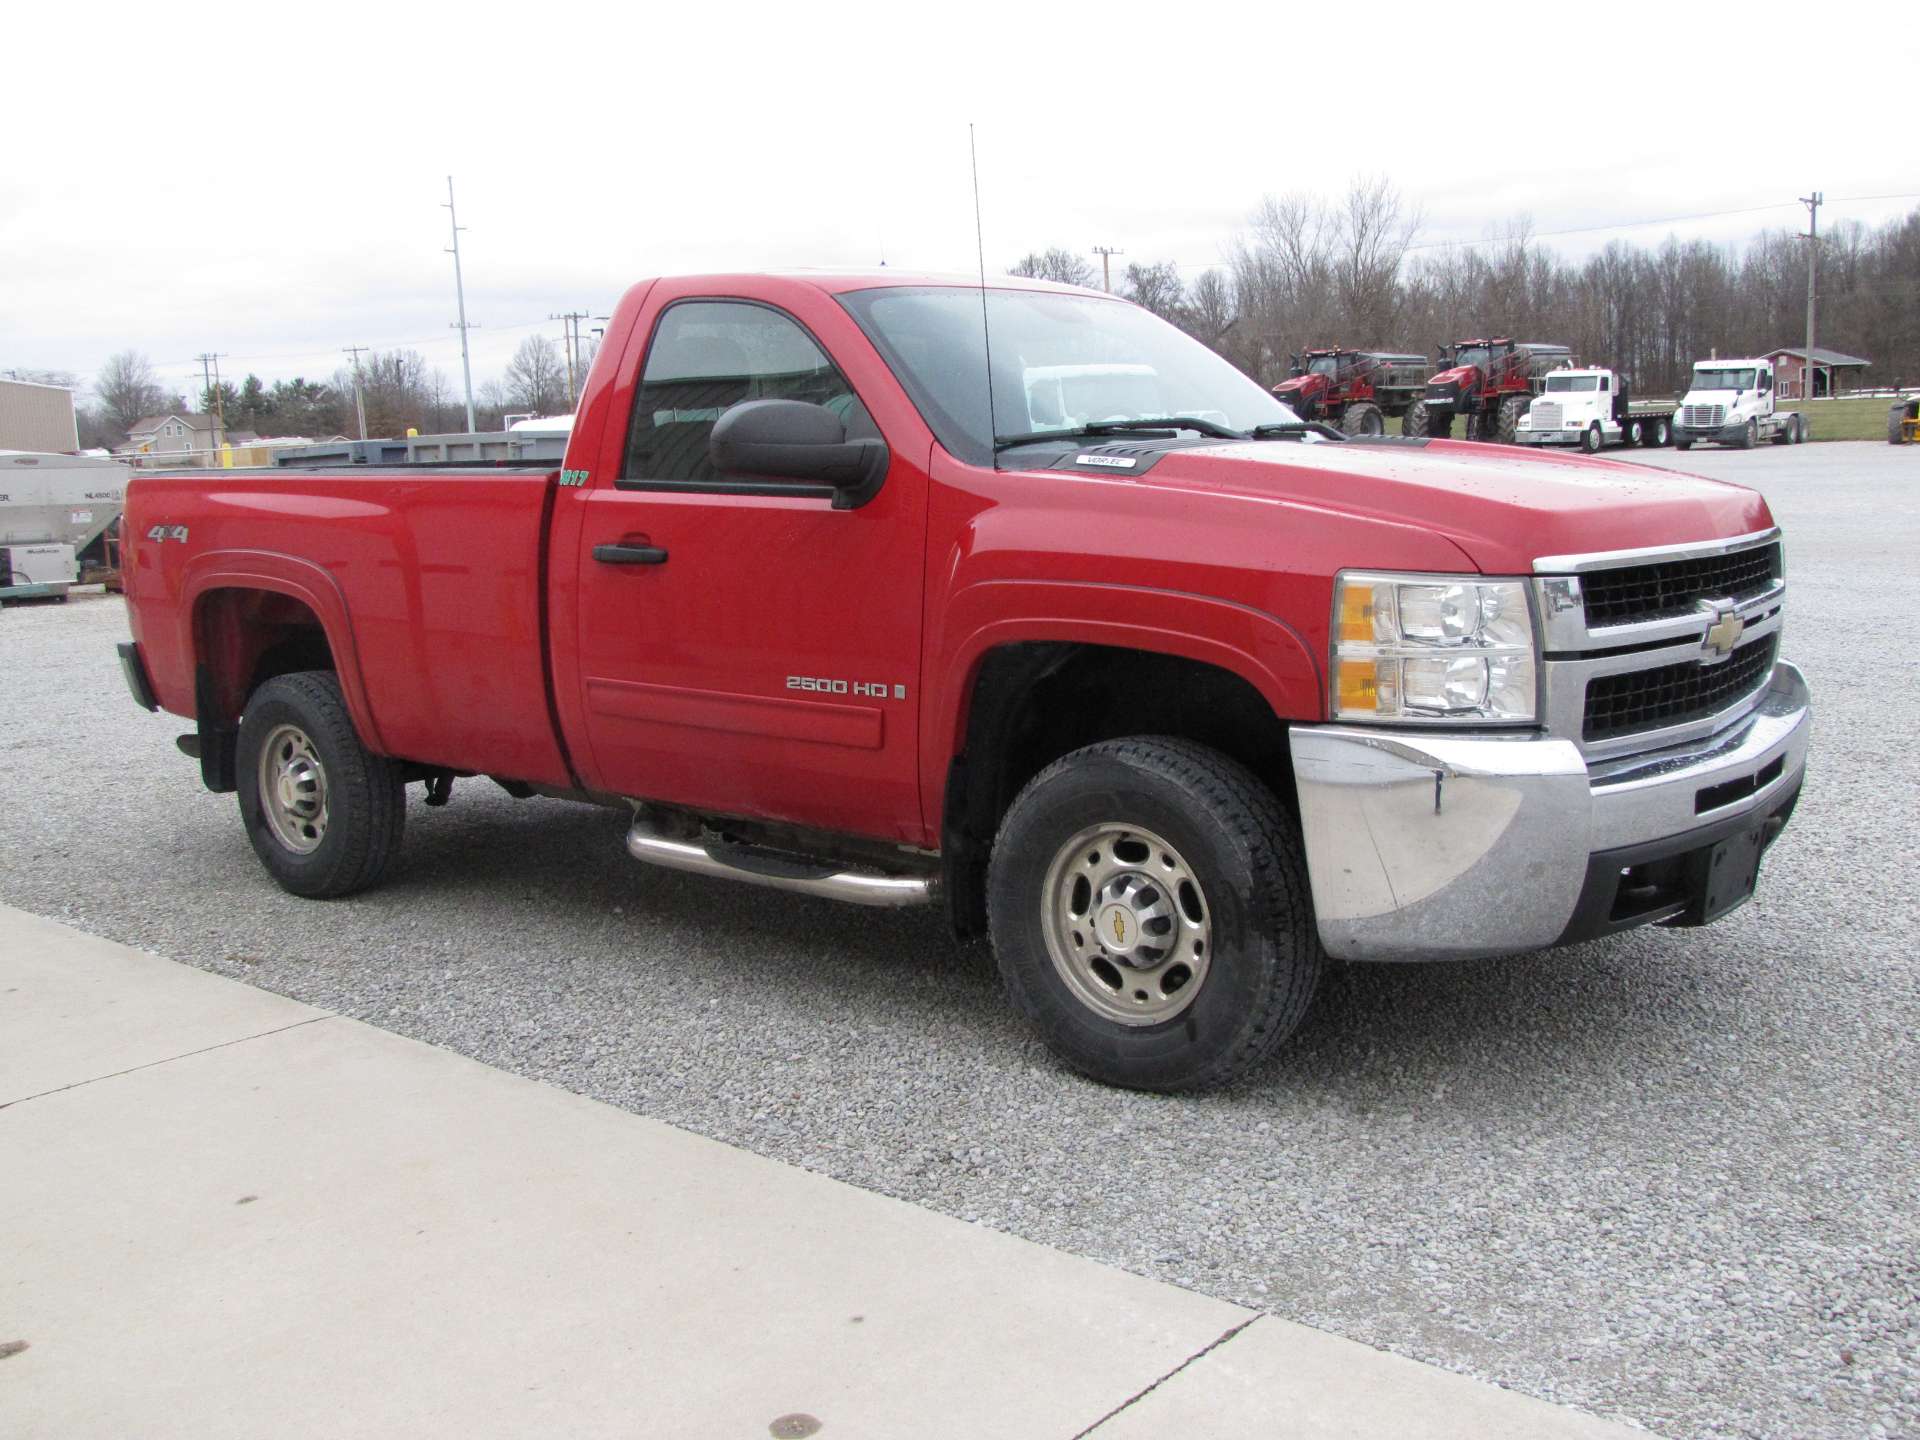 2009 Chevy 2500 HD LT pickup truck - Image 15 of 69